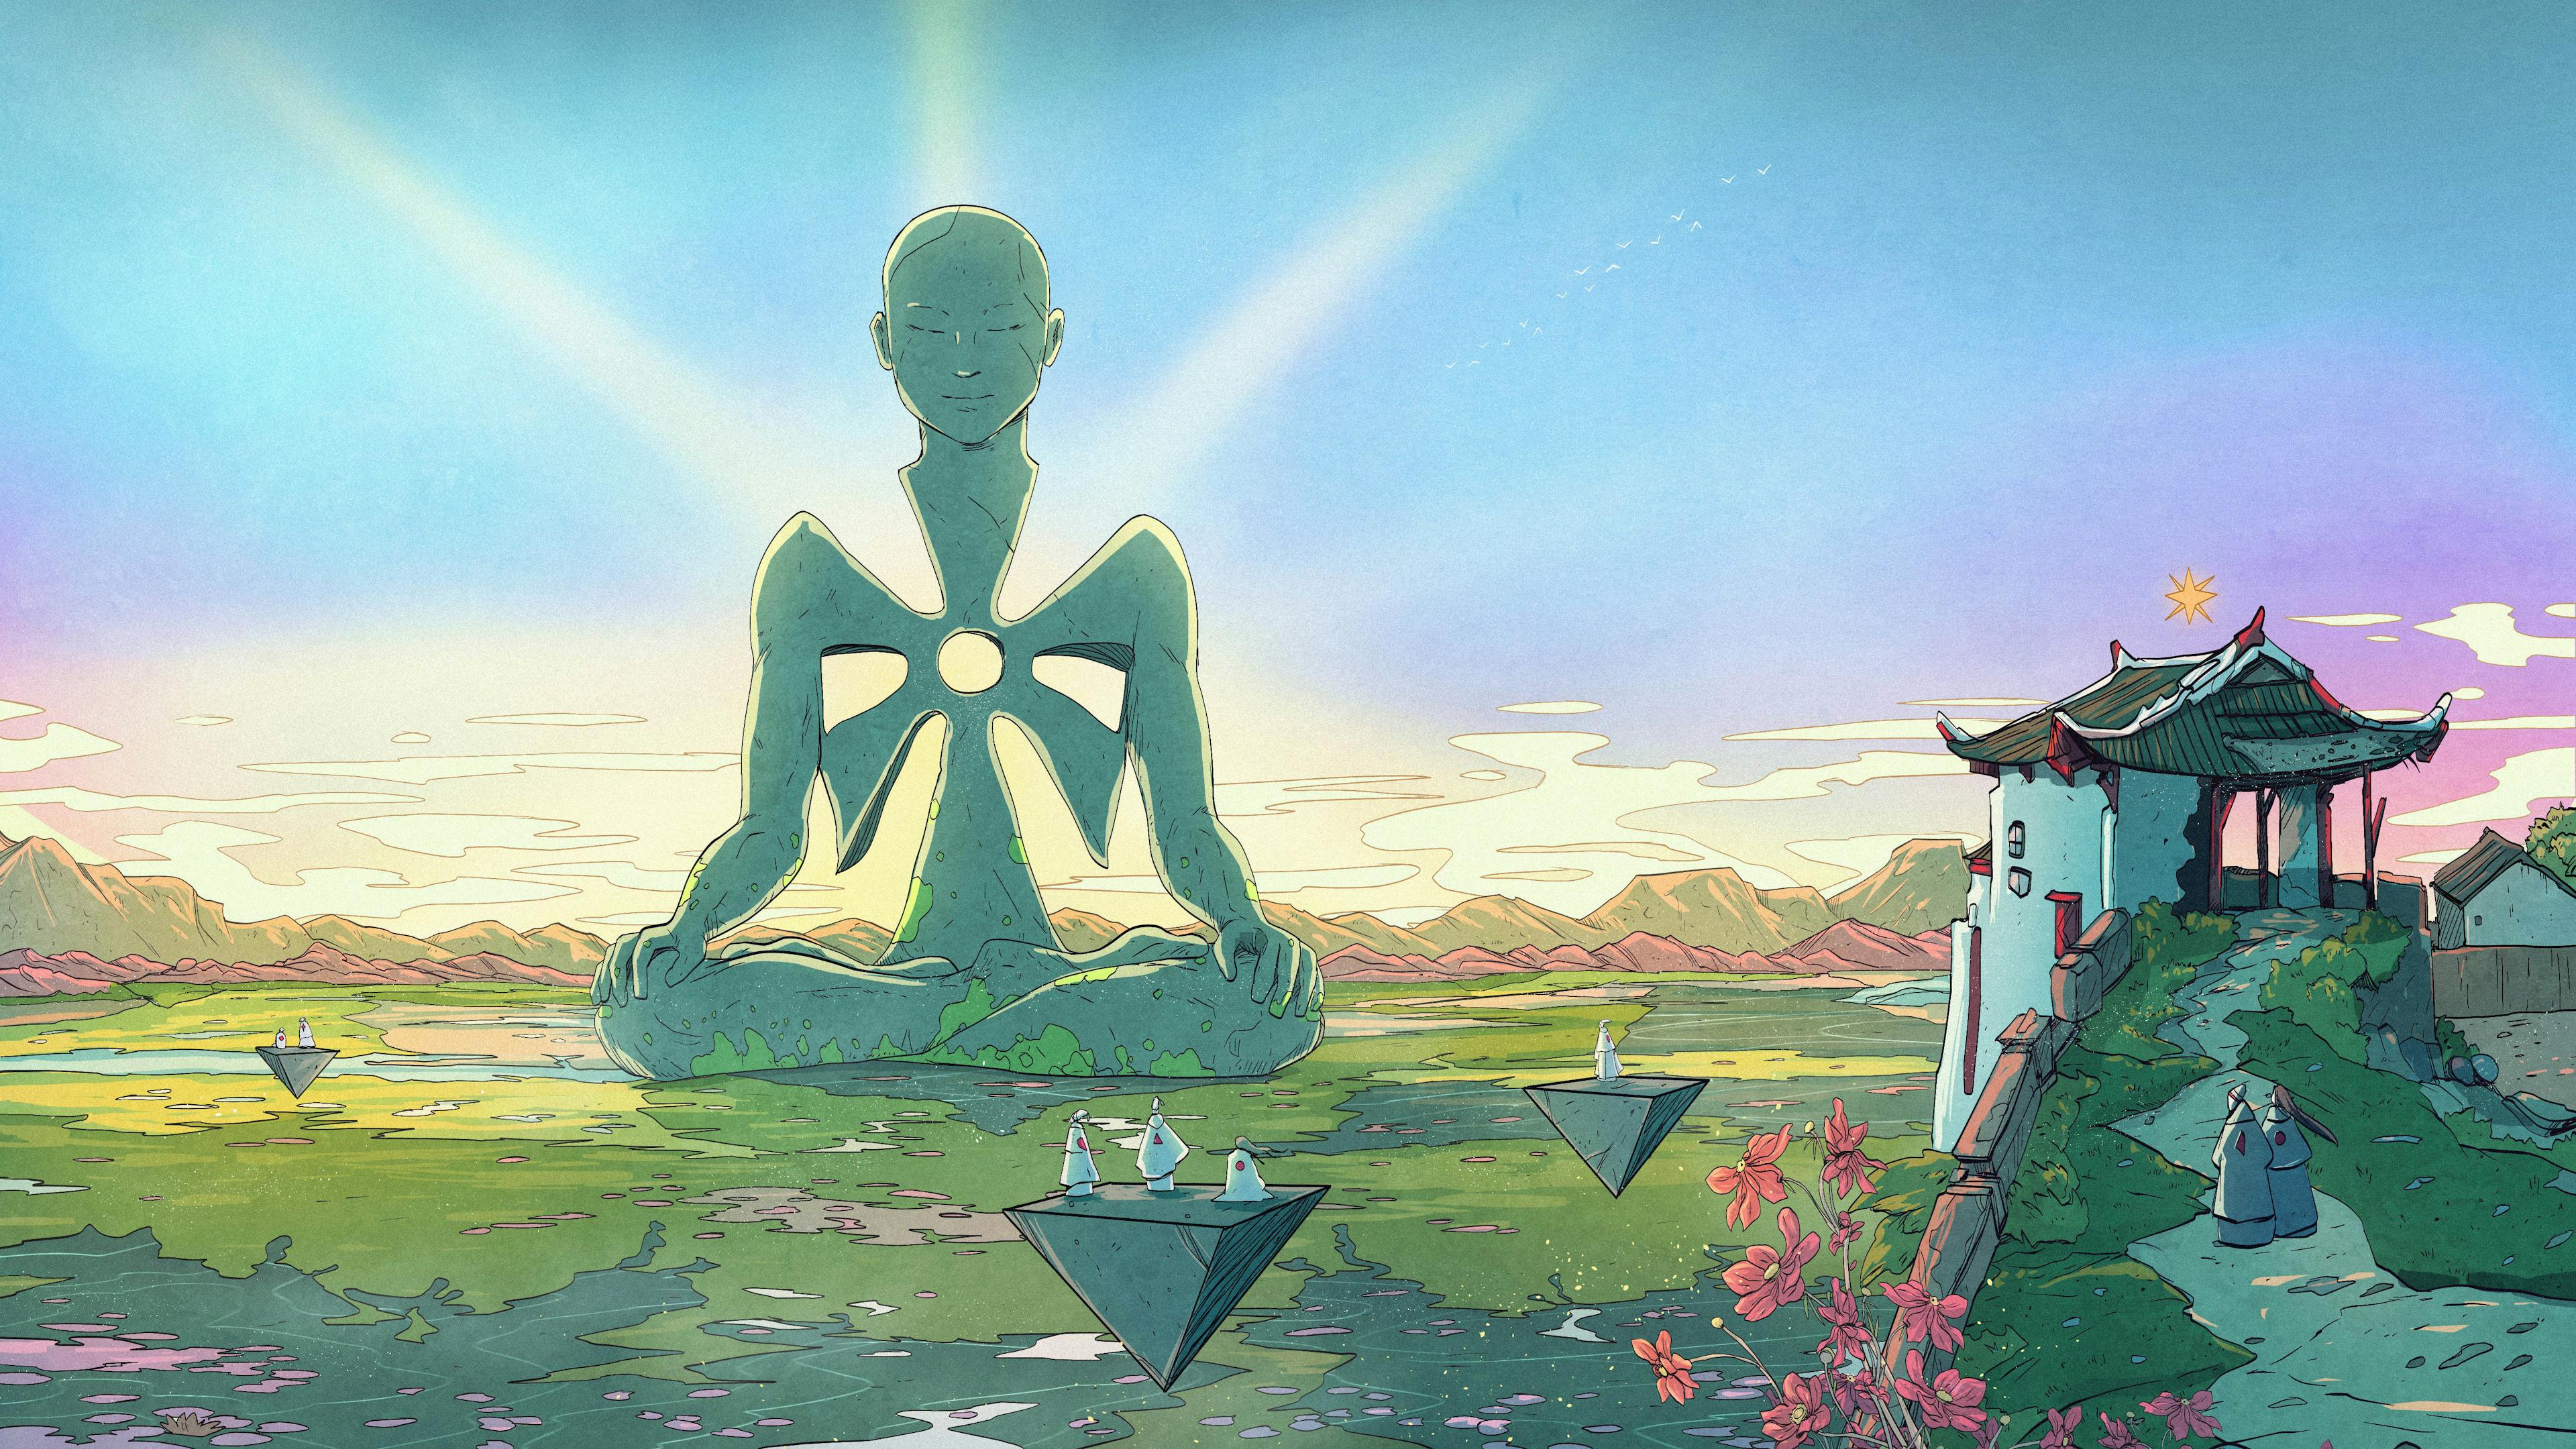 A giant statue of a meditating man